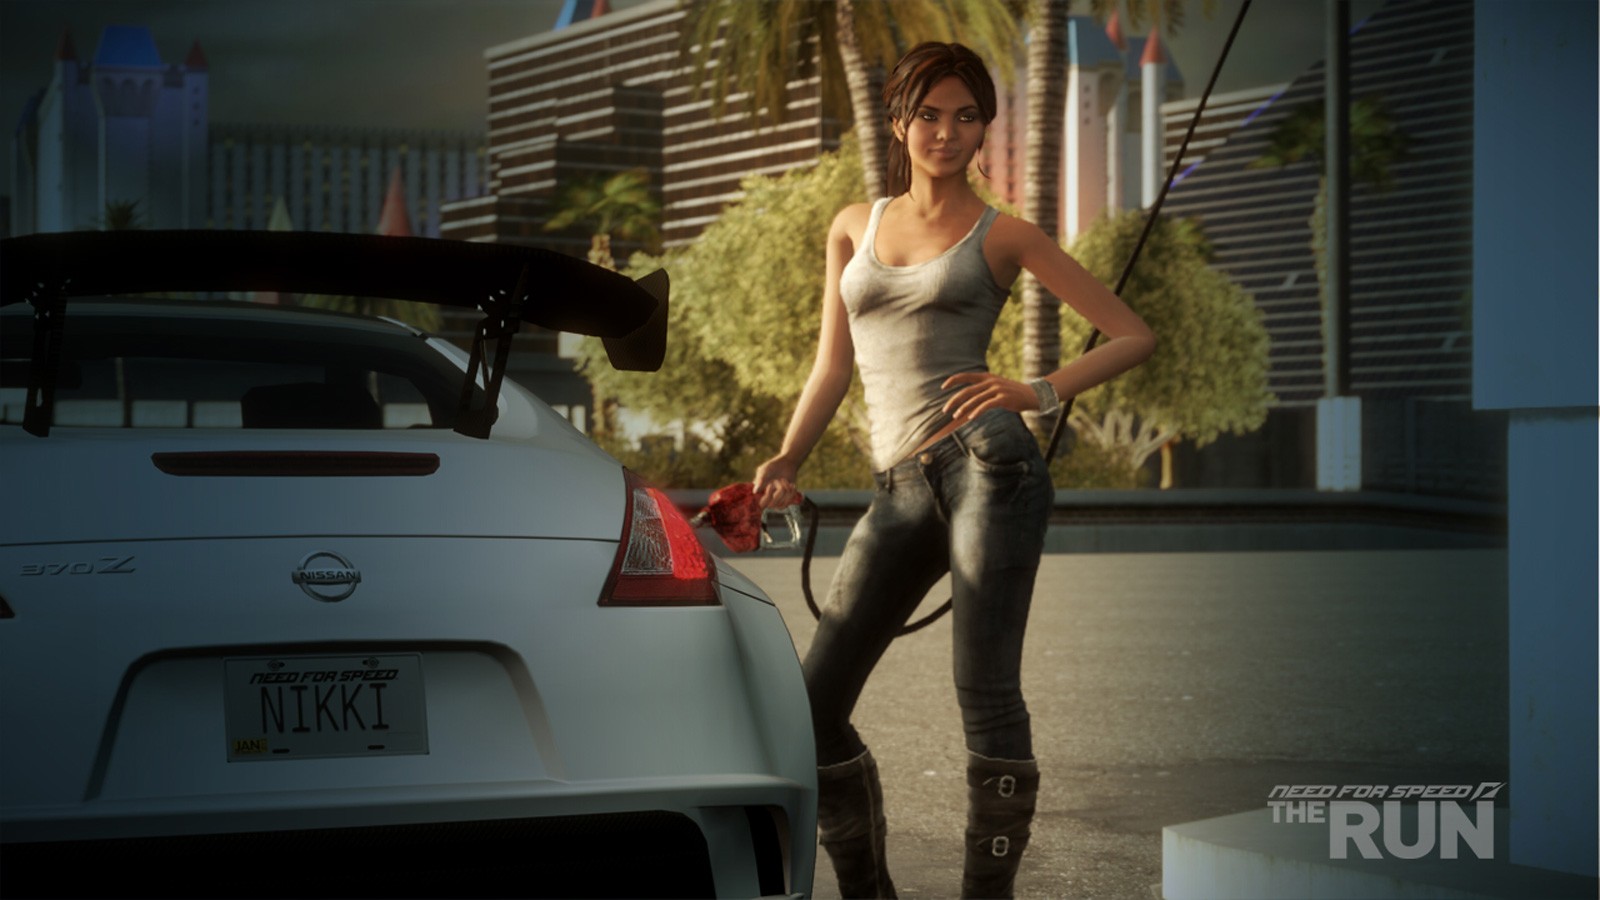 women, Video, Games, Cars, Need, For, Speed, Nissan, Need, For, Speed, The, Run, Girls, With, Cars Wallpaper